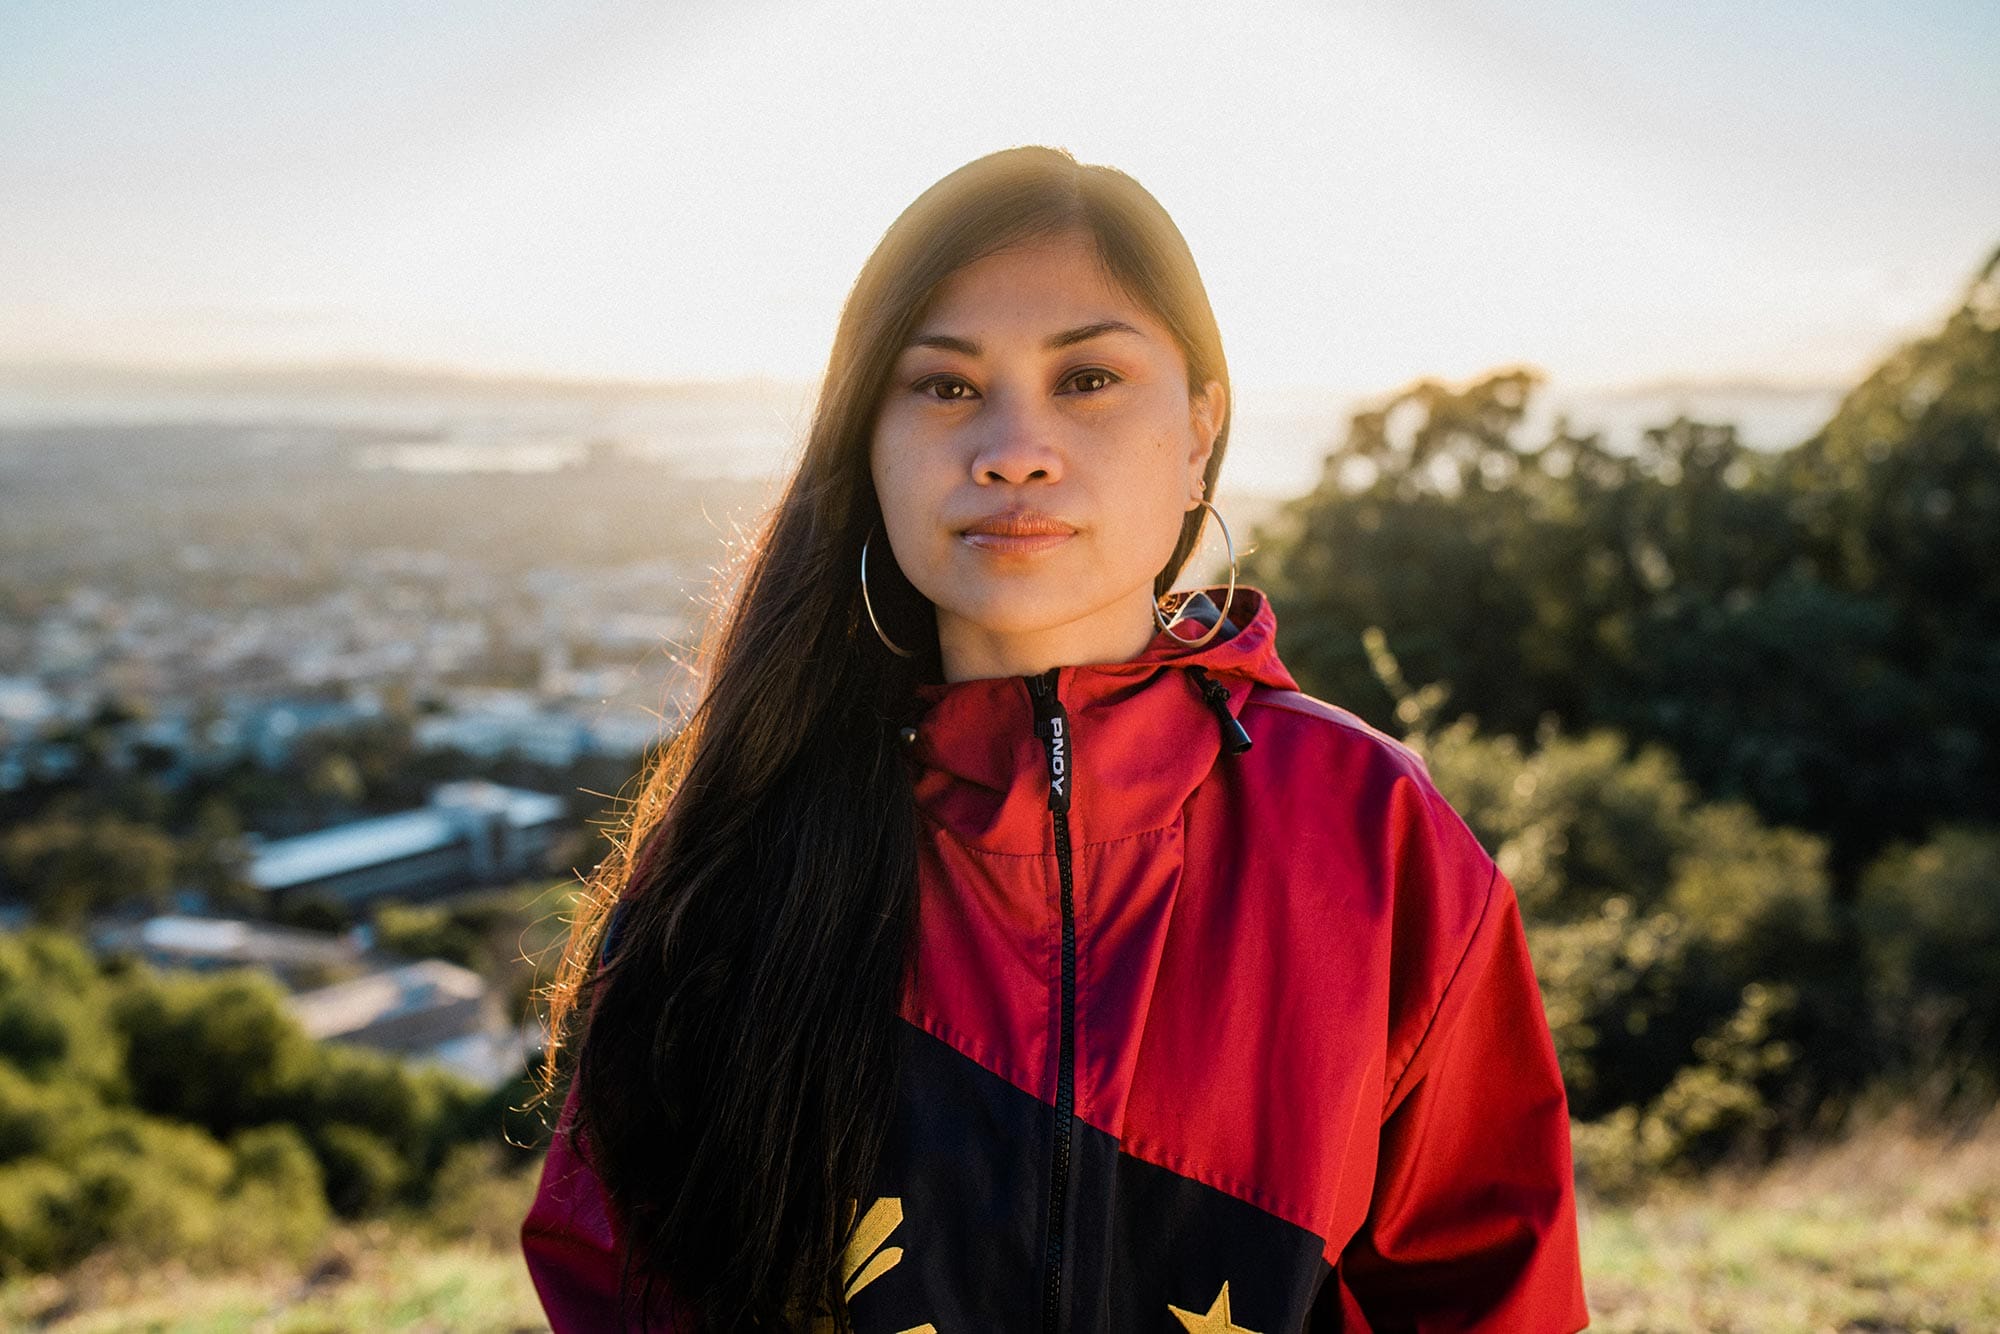 Ruby Ibarra in a red and black coat on the hills of San Francisco Bay Area.